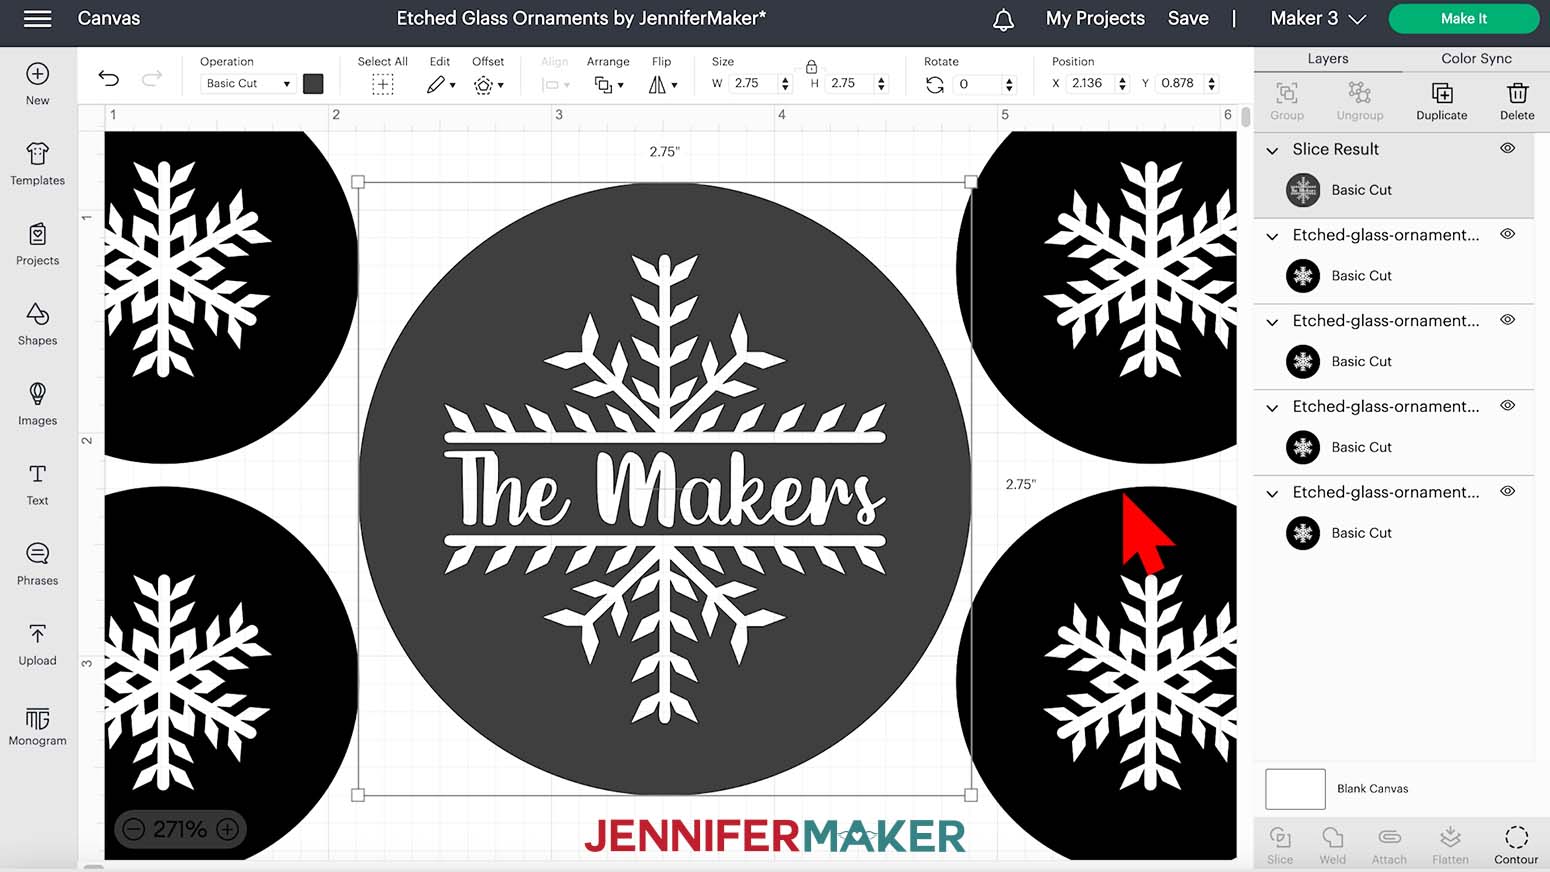 A screenshot of the Cricut Design Space canvas with the words The Makers added and positioned in the center of the large snowflake design. The large design is centered within a dark gray circle that is 2.75 inches wide and tall.